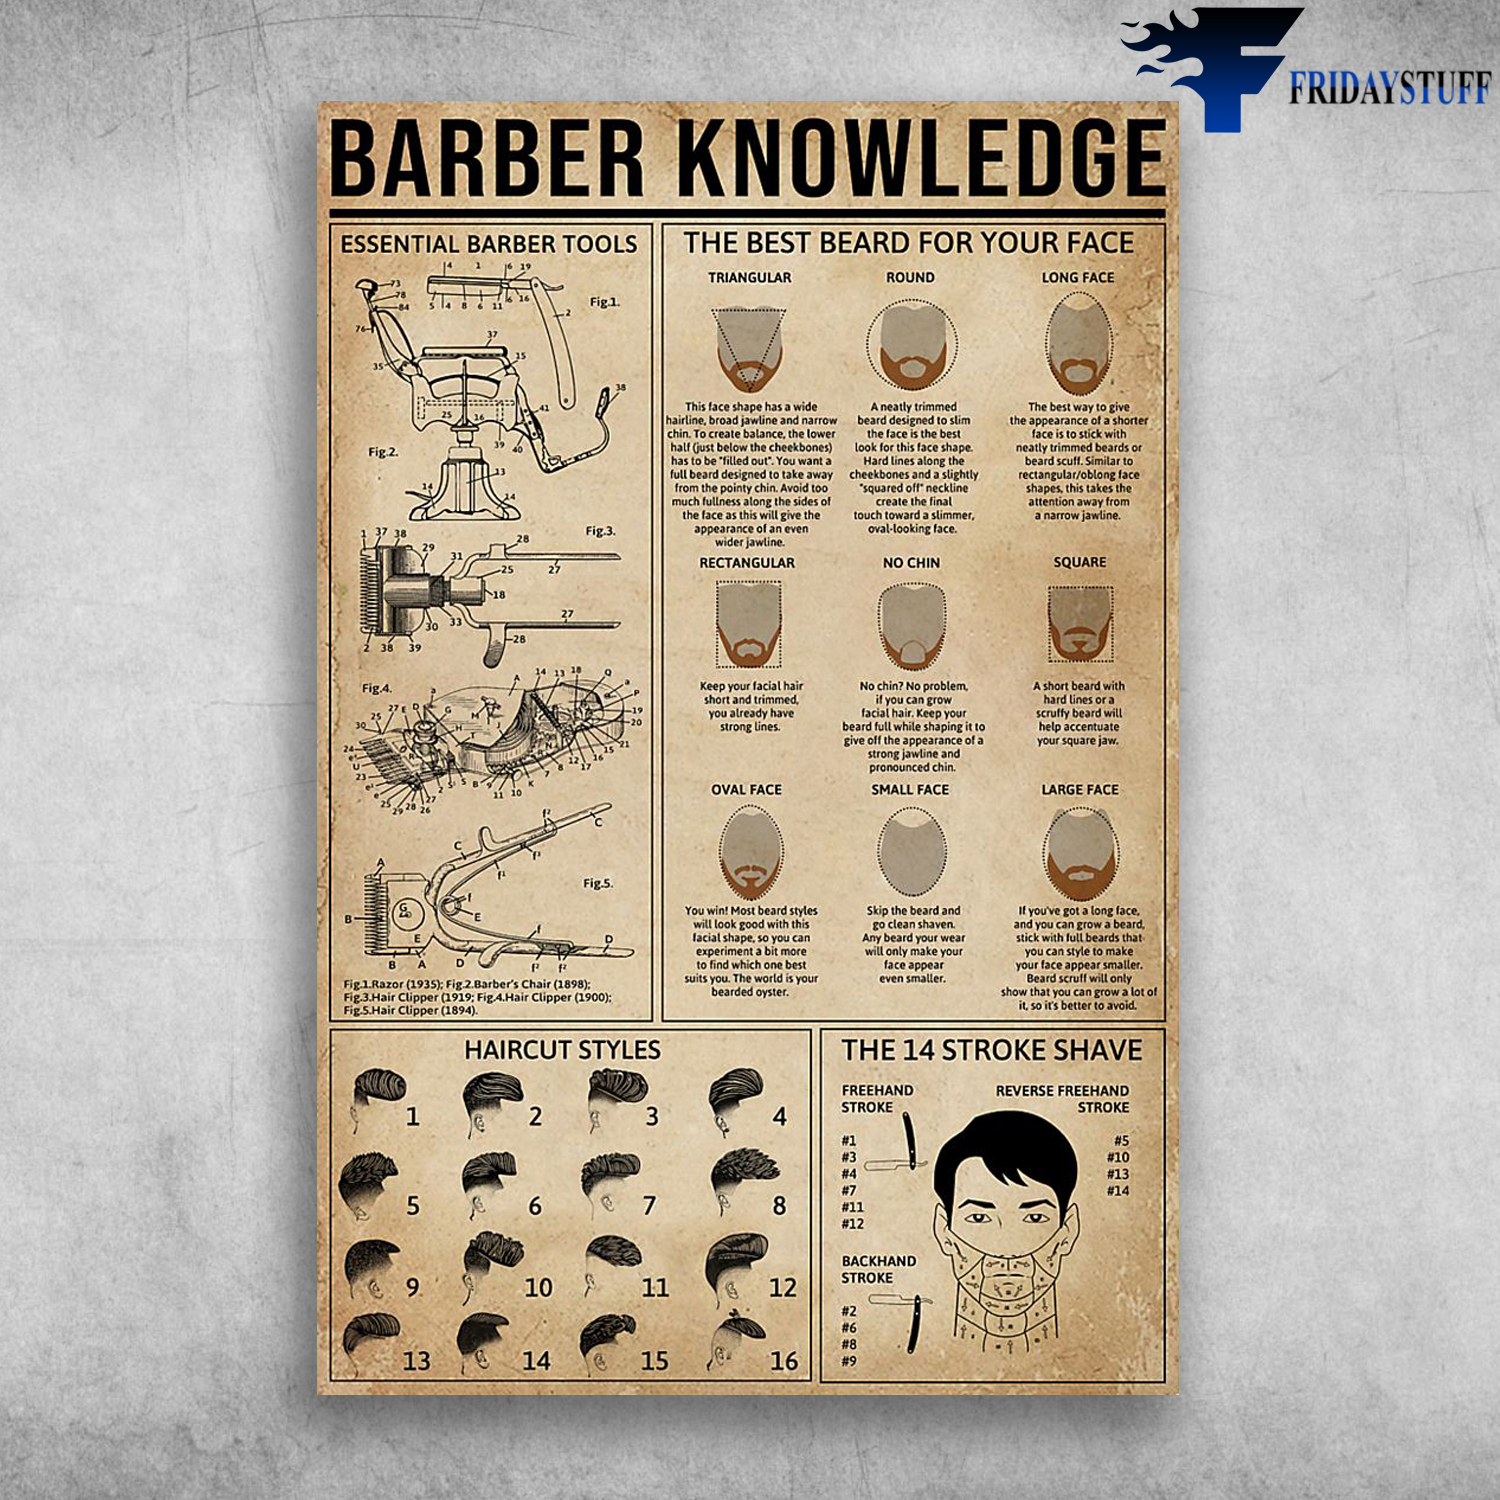 Barber Knowledge Essential Barber Tools The Best Beard For Your Face